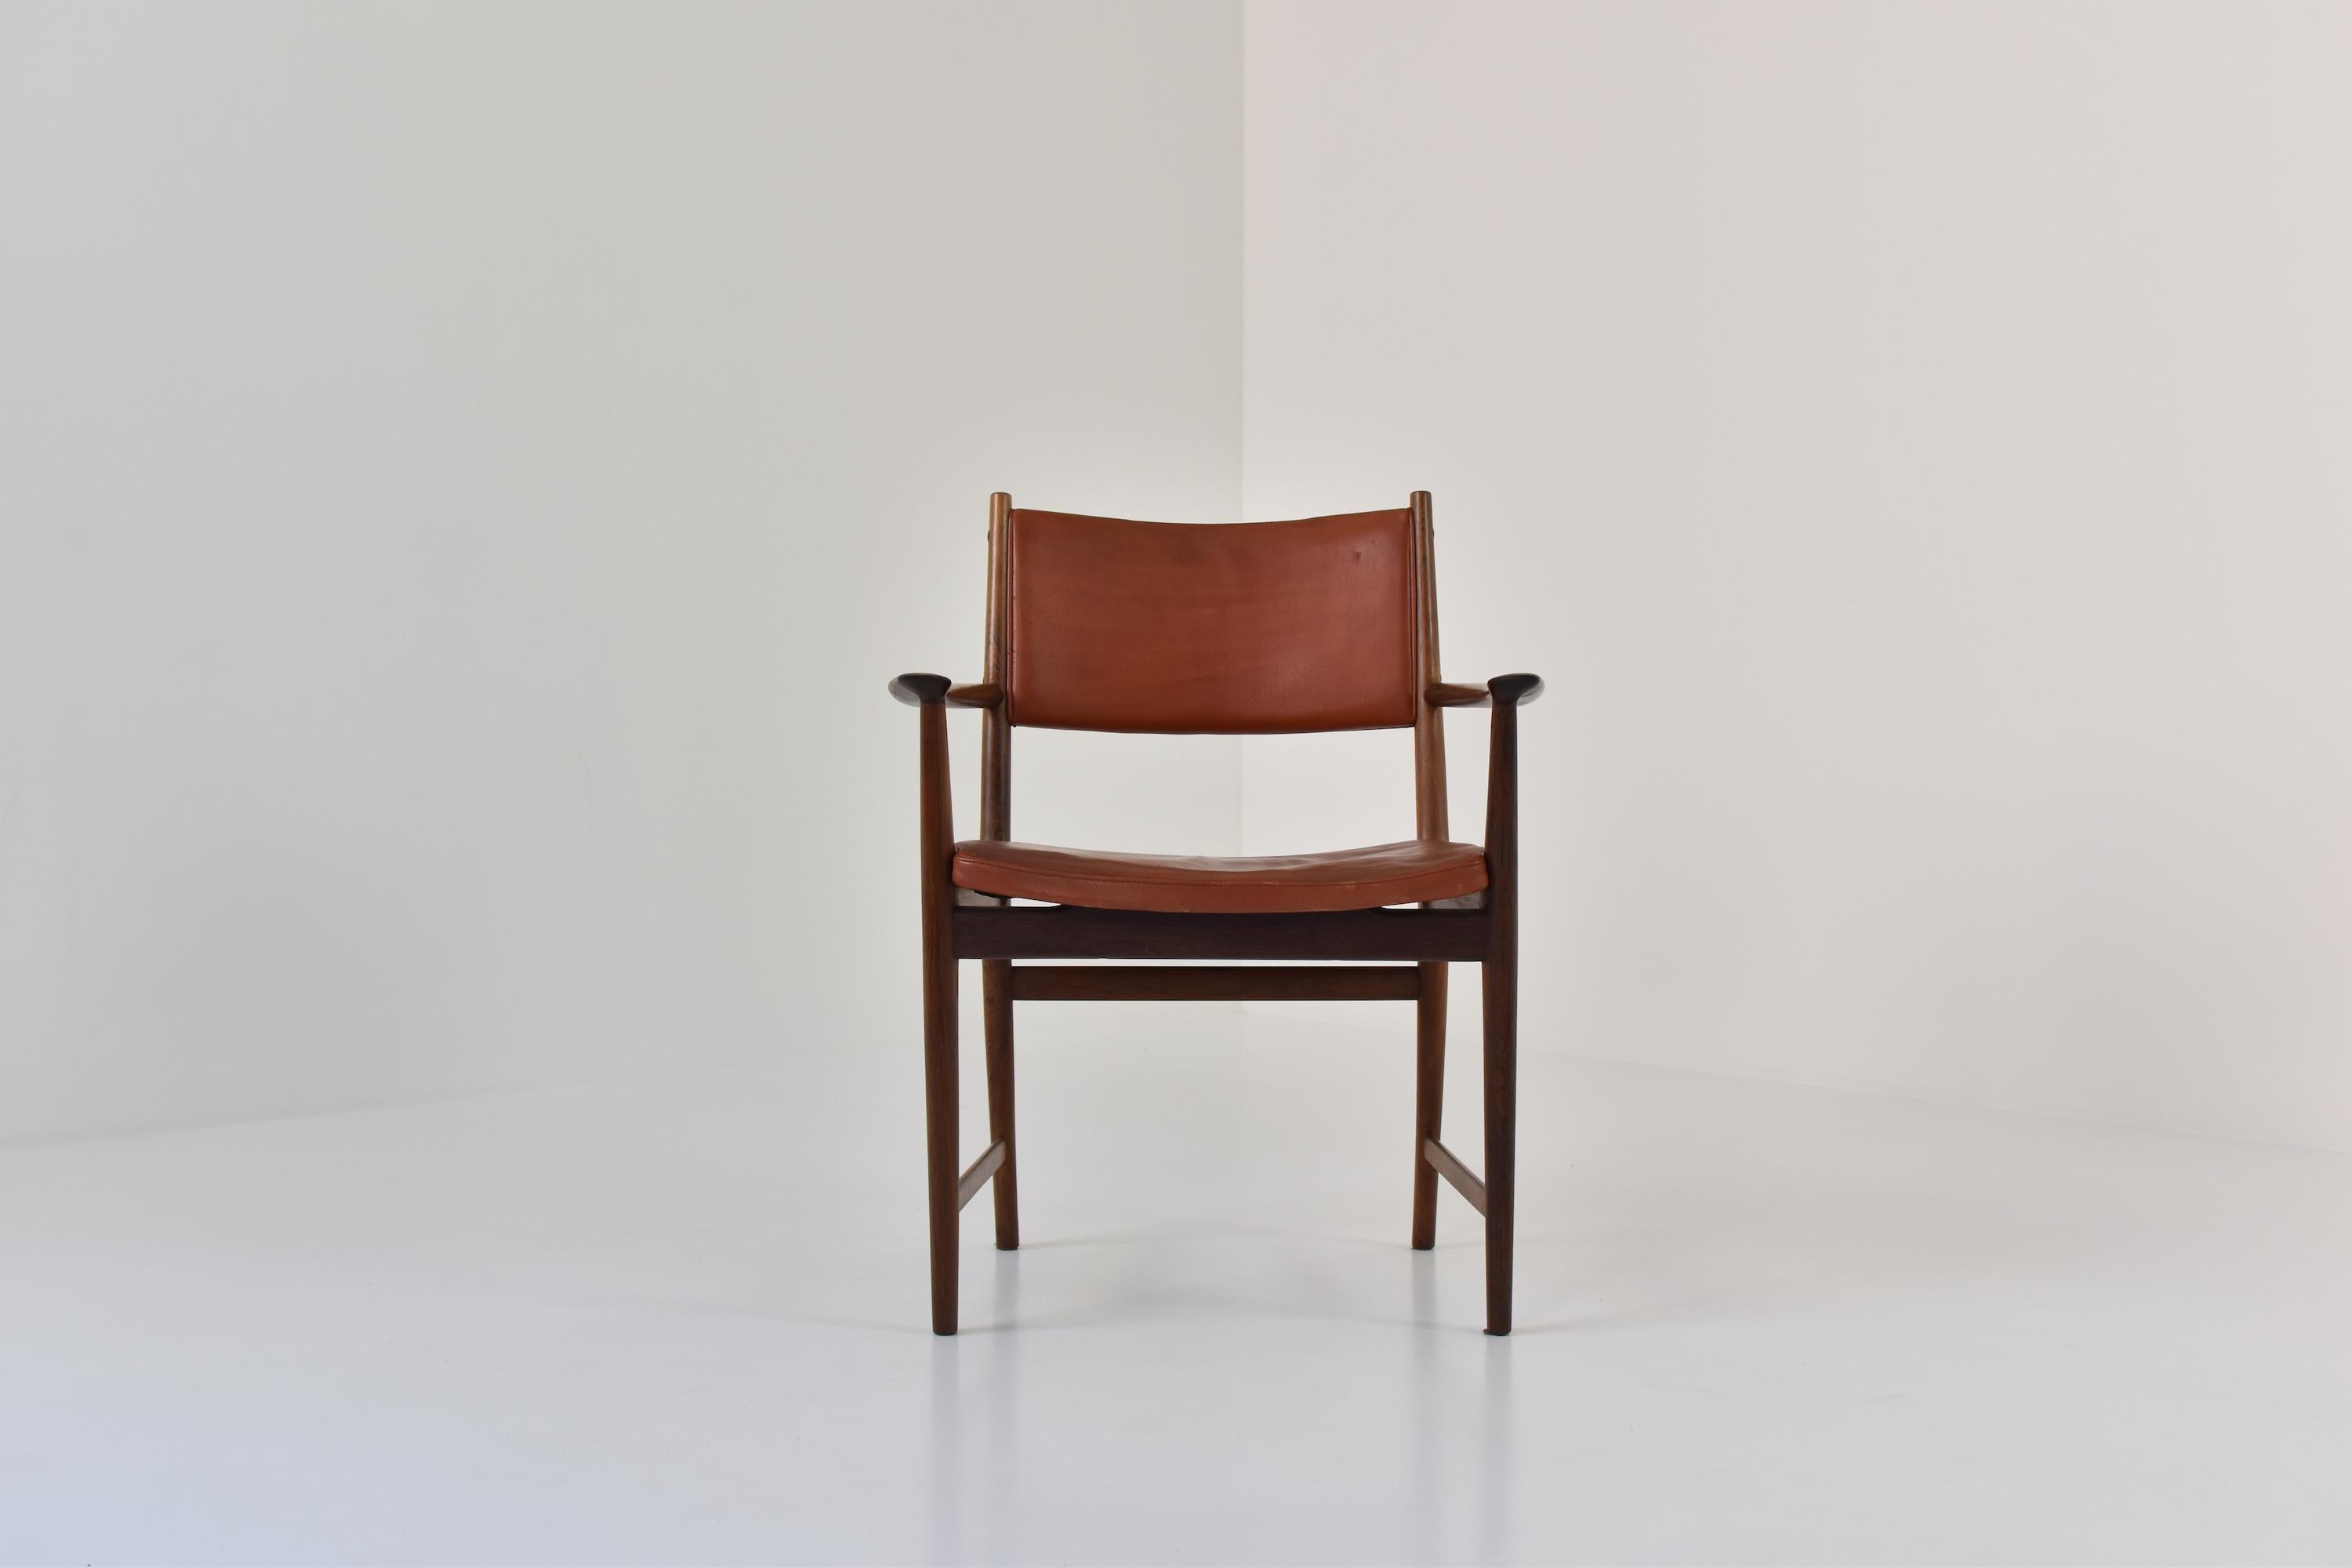 Gorgeous armchair designed by Kai Lyngfeldt Larsen for Søren Willadsen Møbelfabrik, Denmark, 1950s. This chair features a rosewood frame and the original brown leather upholstery. Great patina. Labeled underneath.